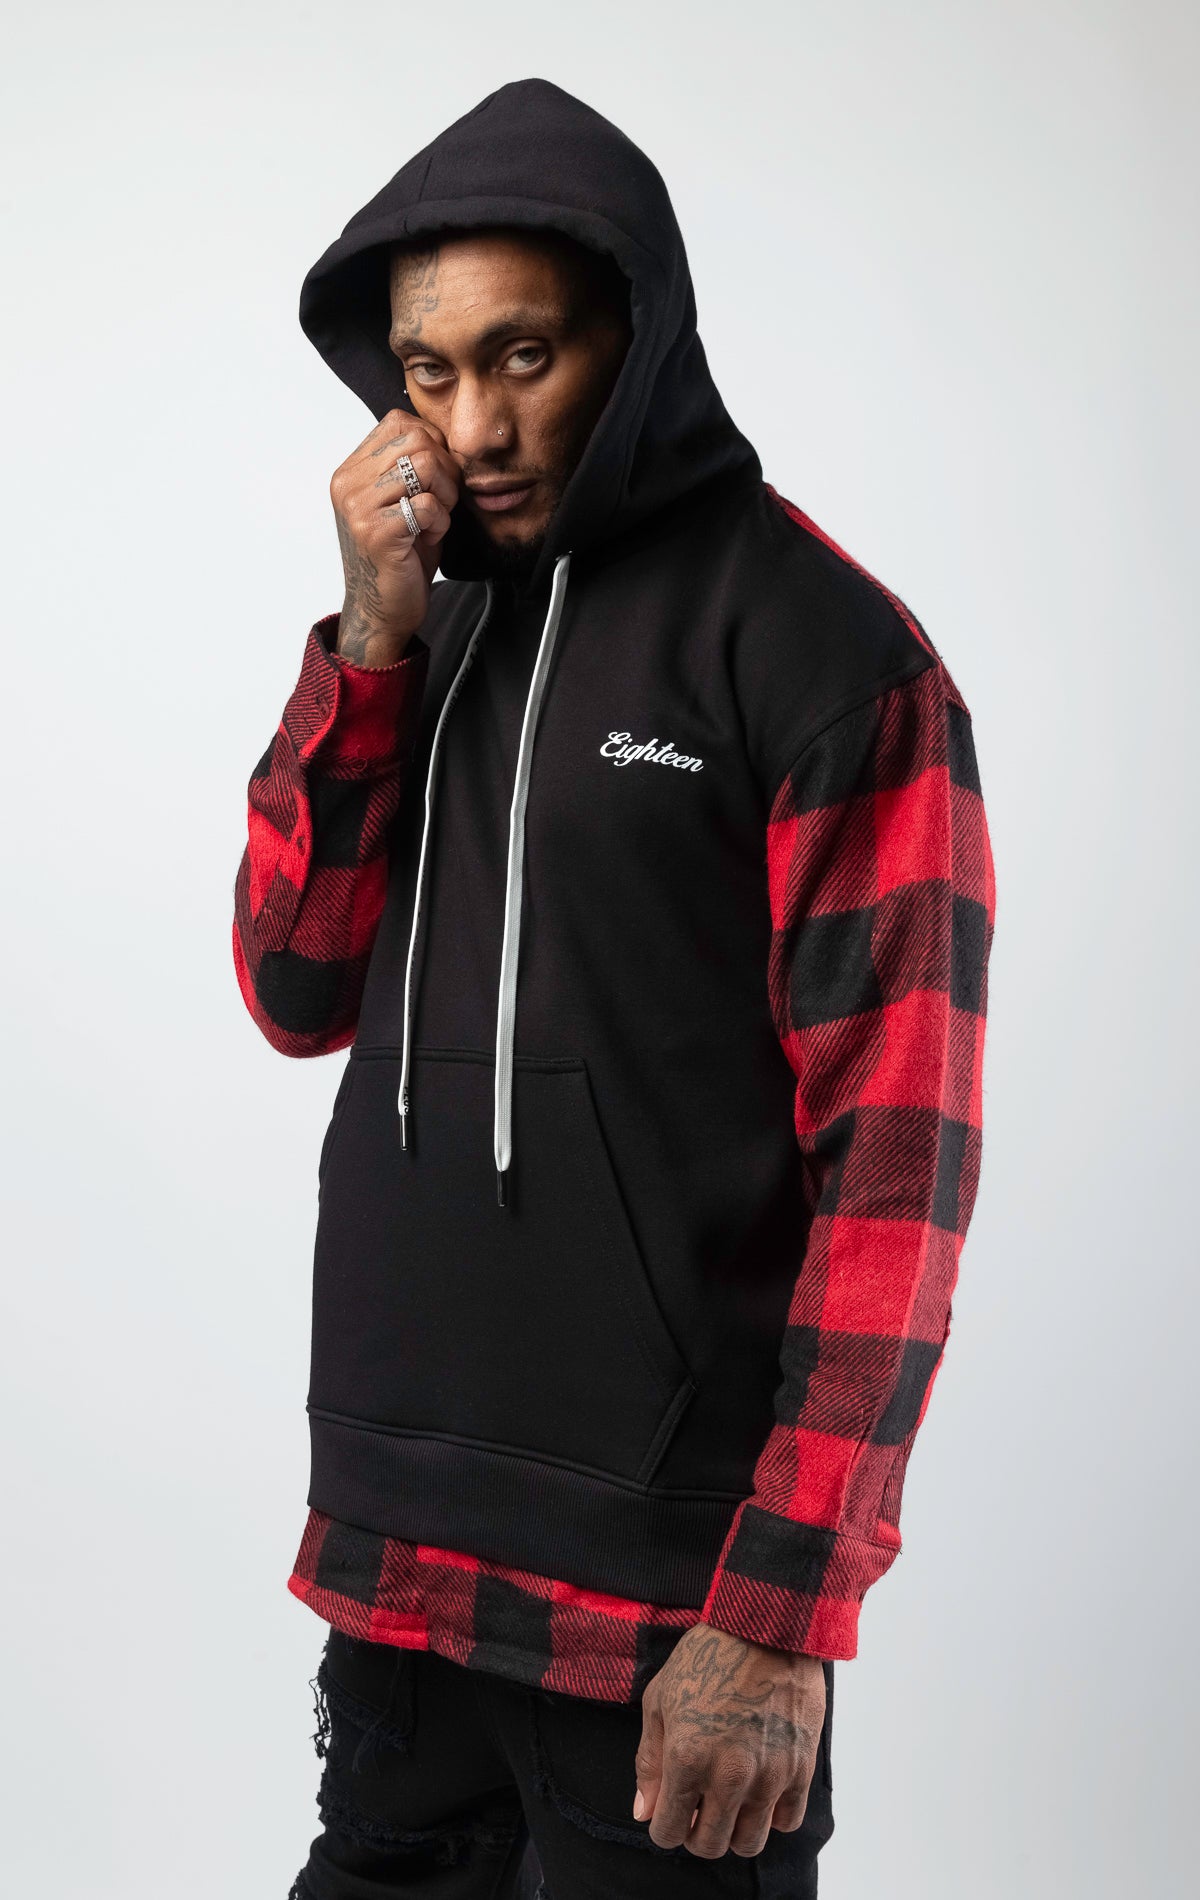 Pullover hooded sweatshirt with plaid pattern on back and sleeves.